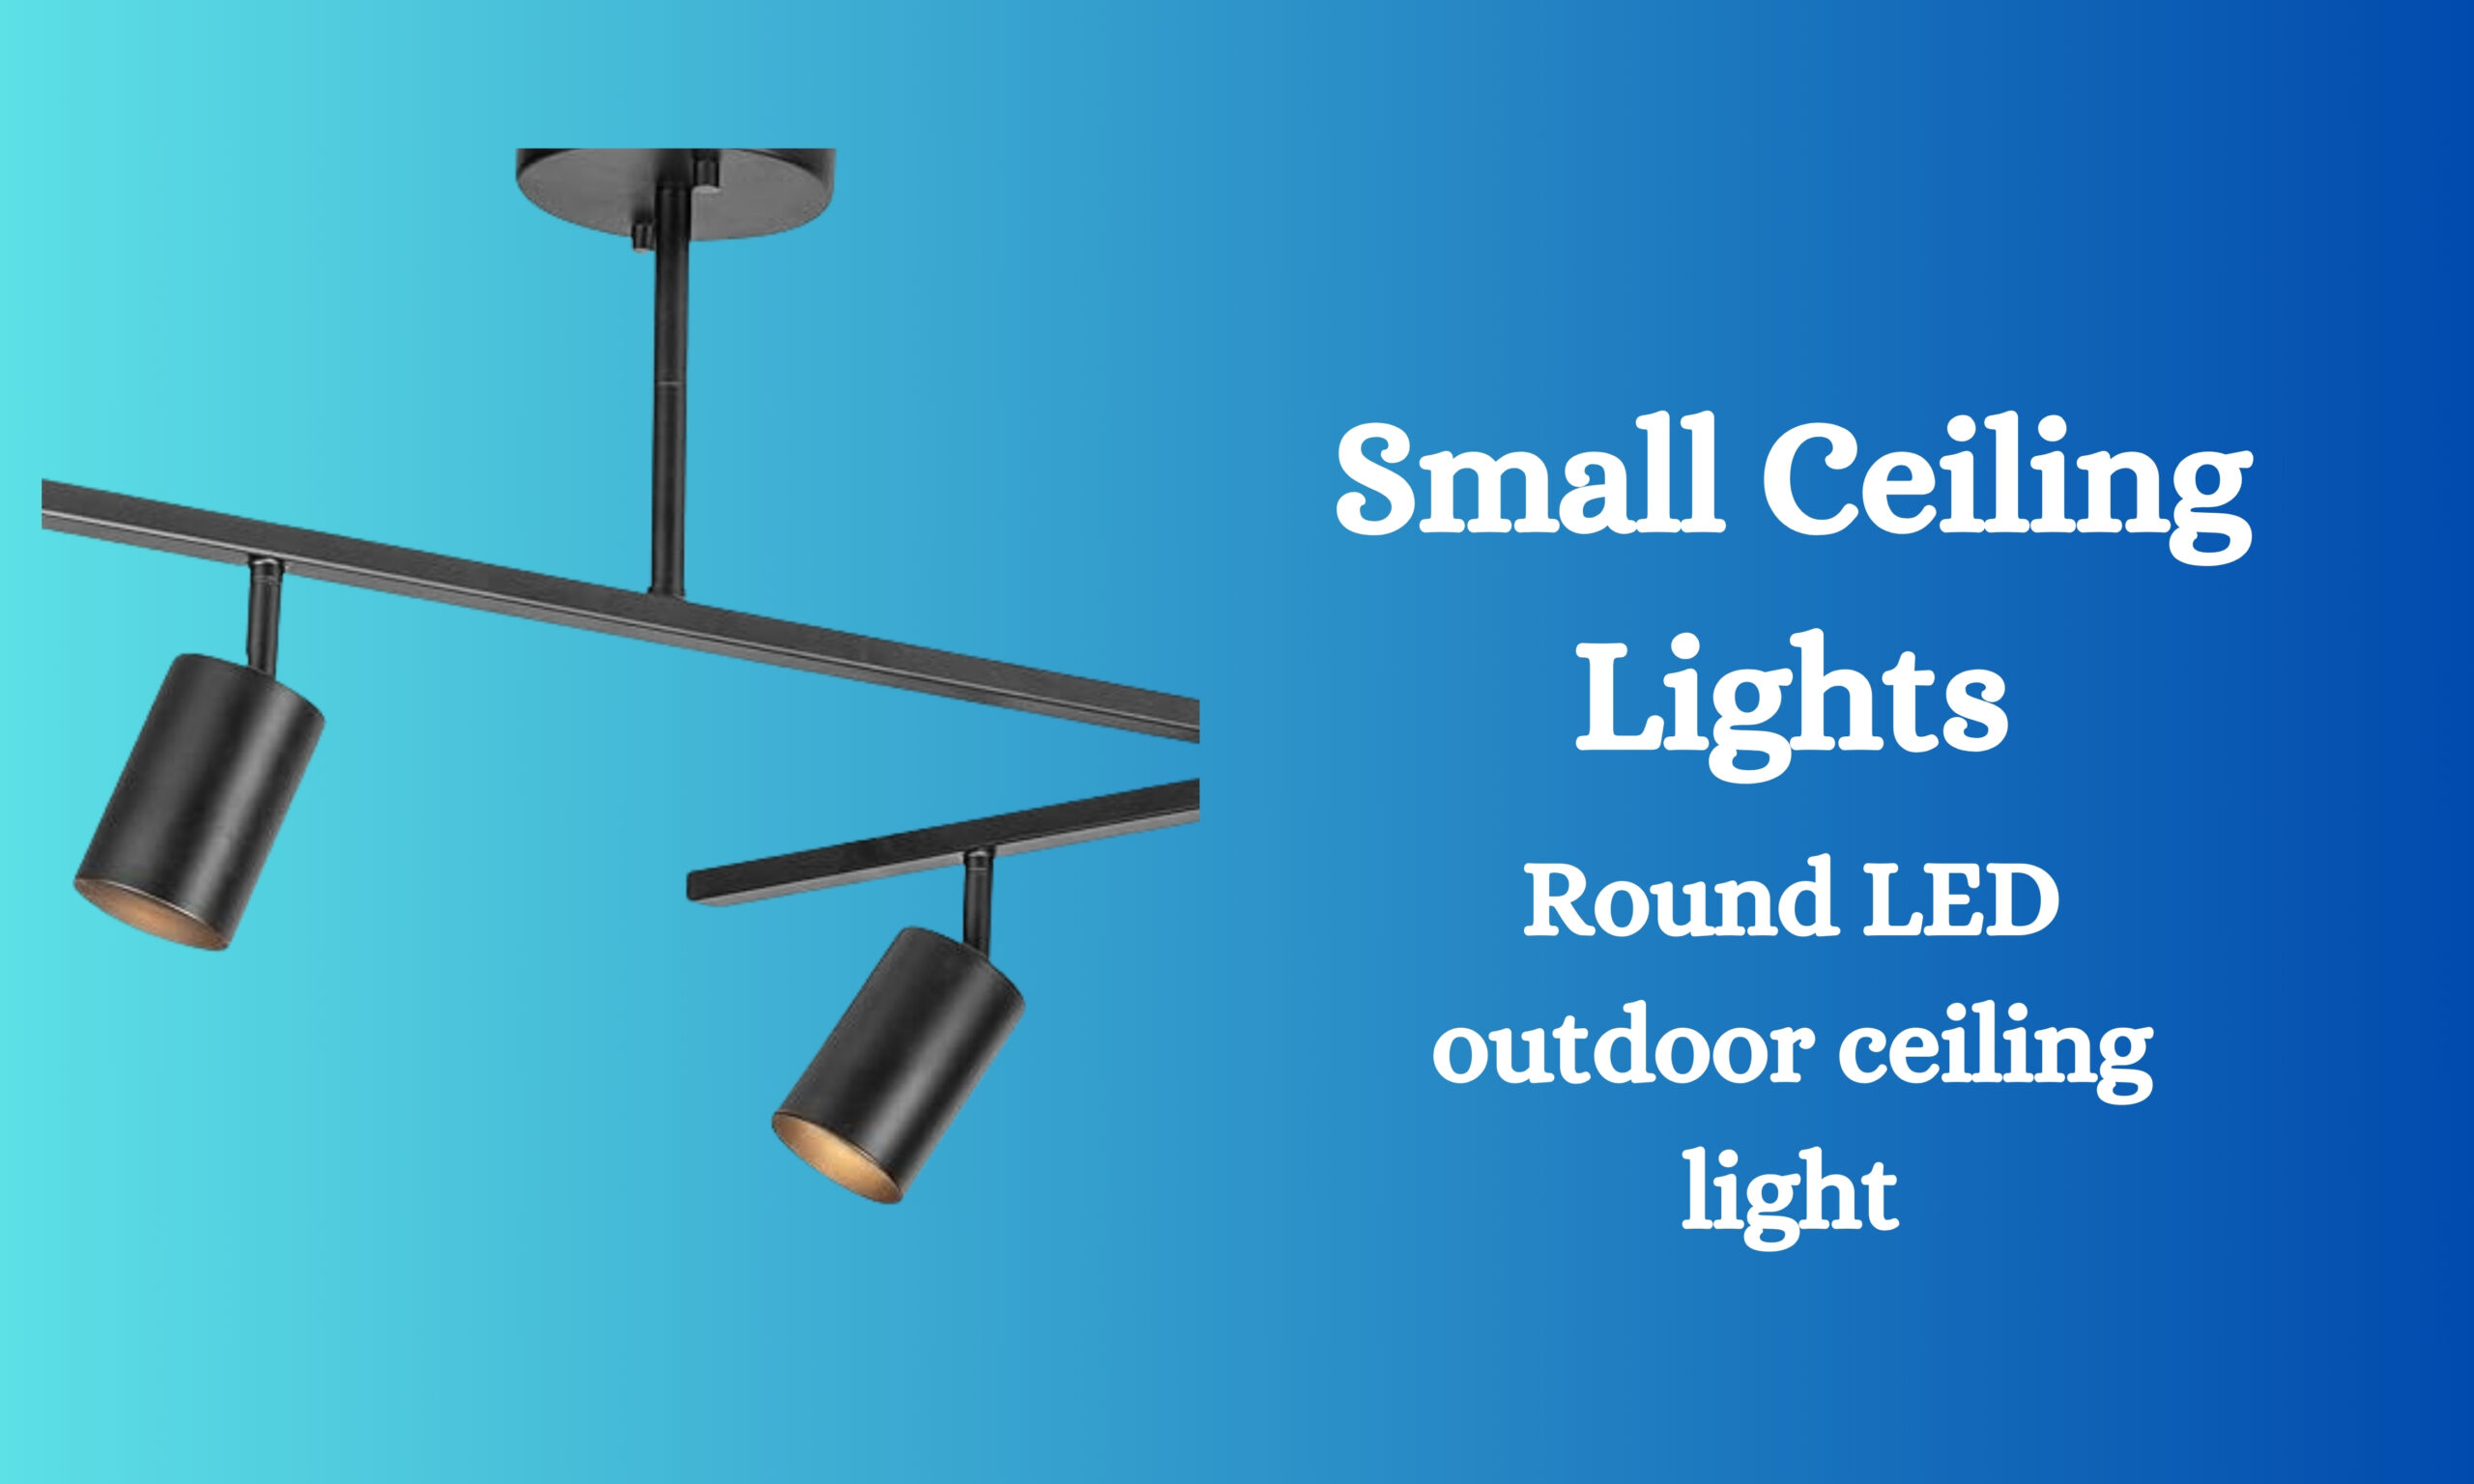 Small Ceiling Lights